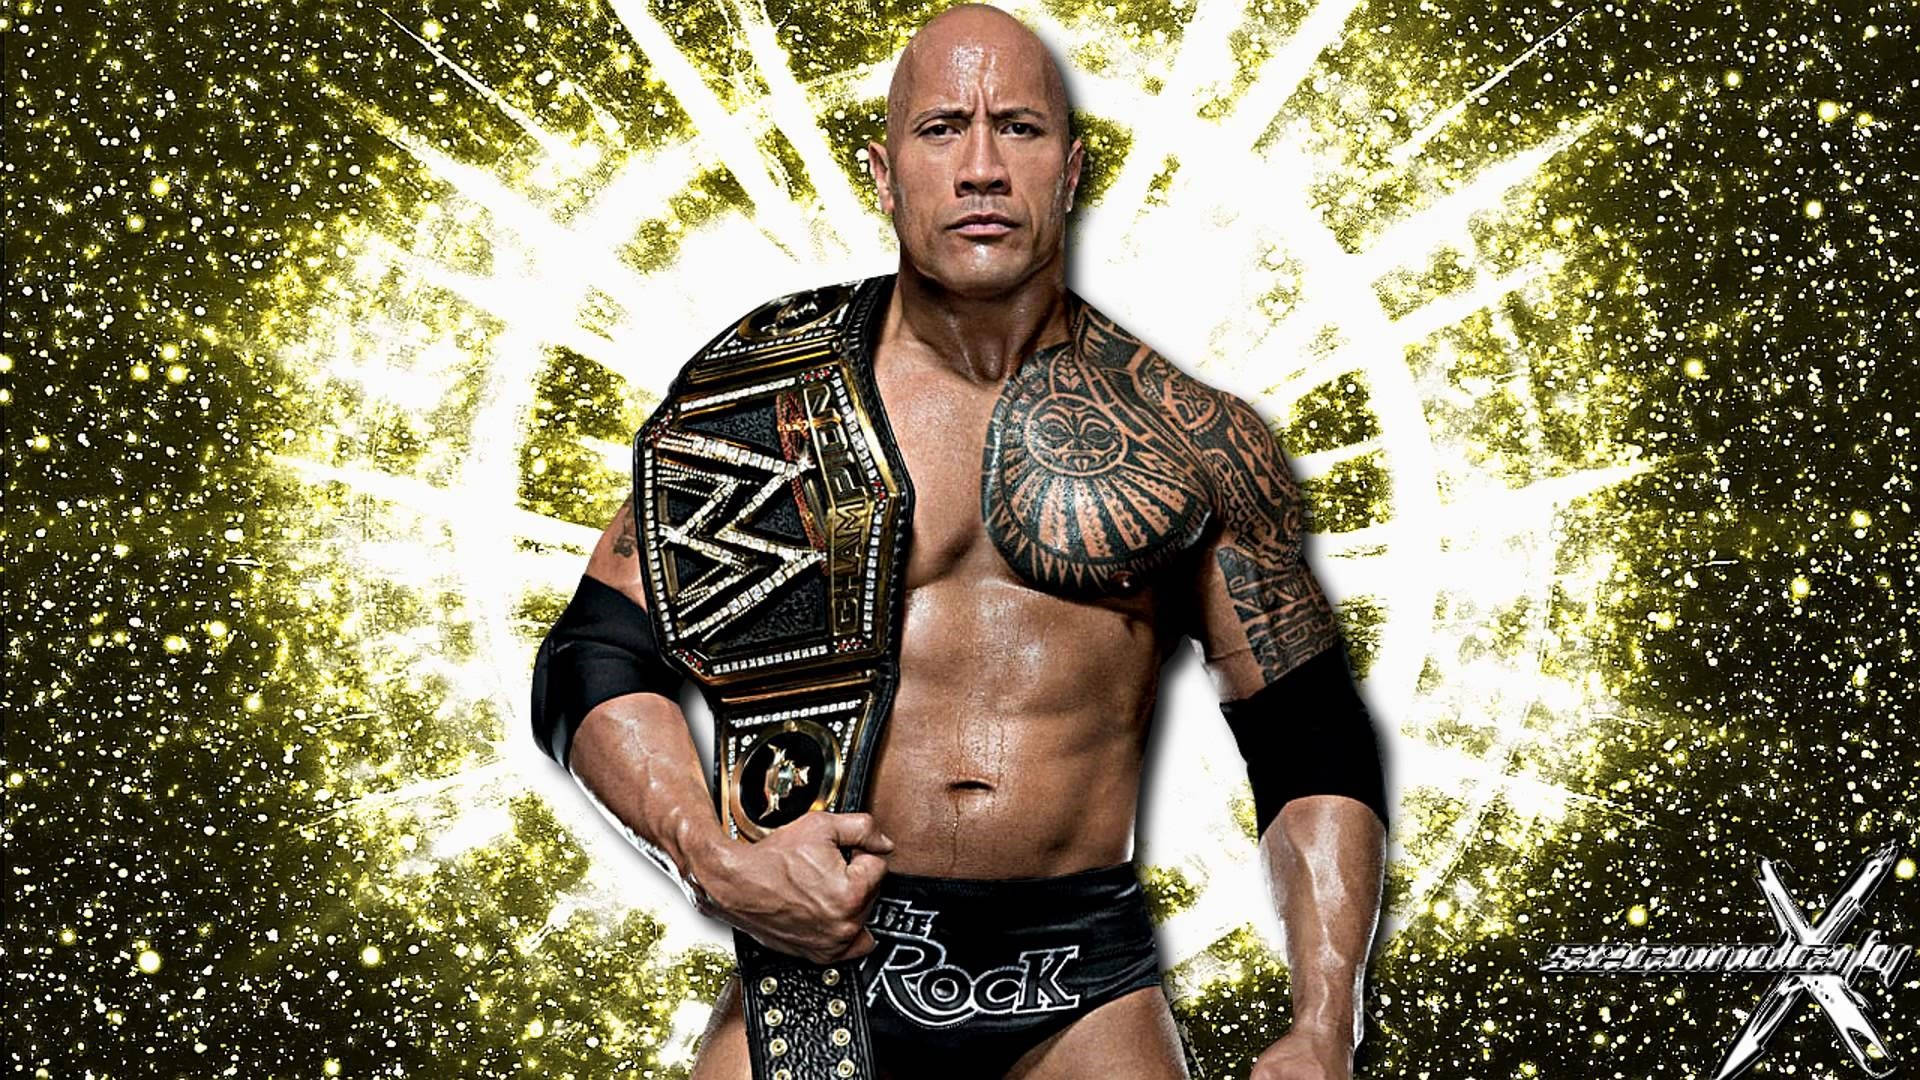 Top 999+ The Rock Wallpaper Full HD, 4K✅Free to Use